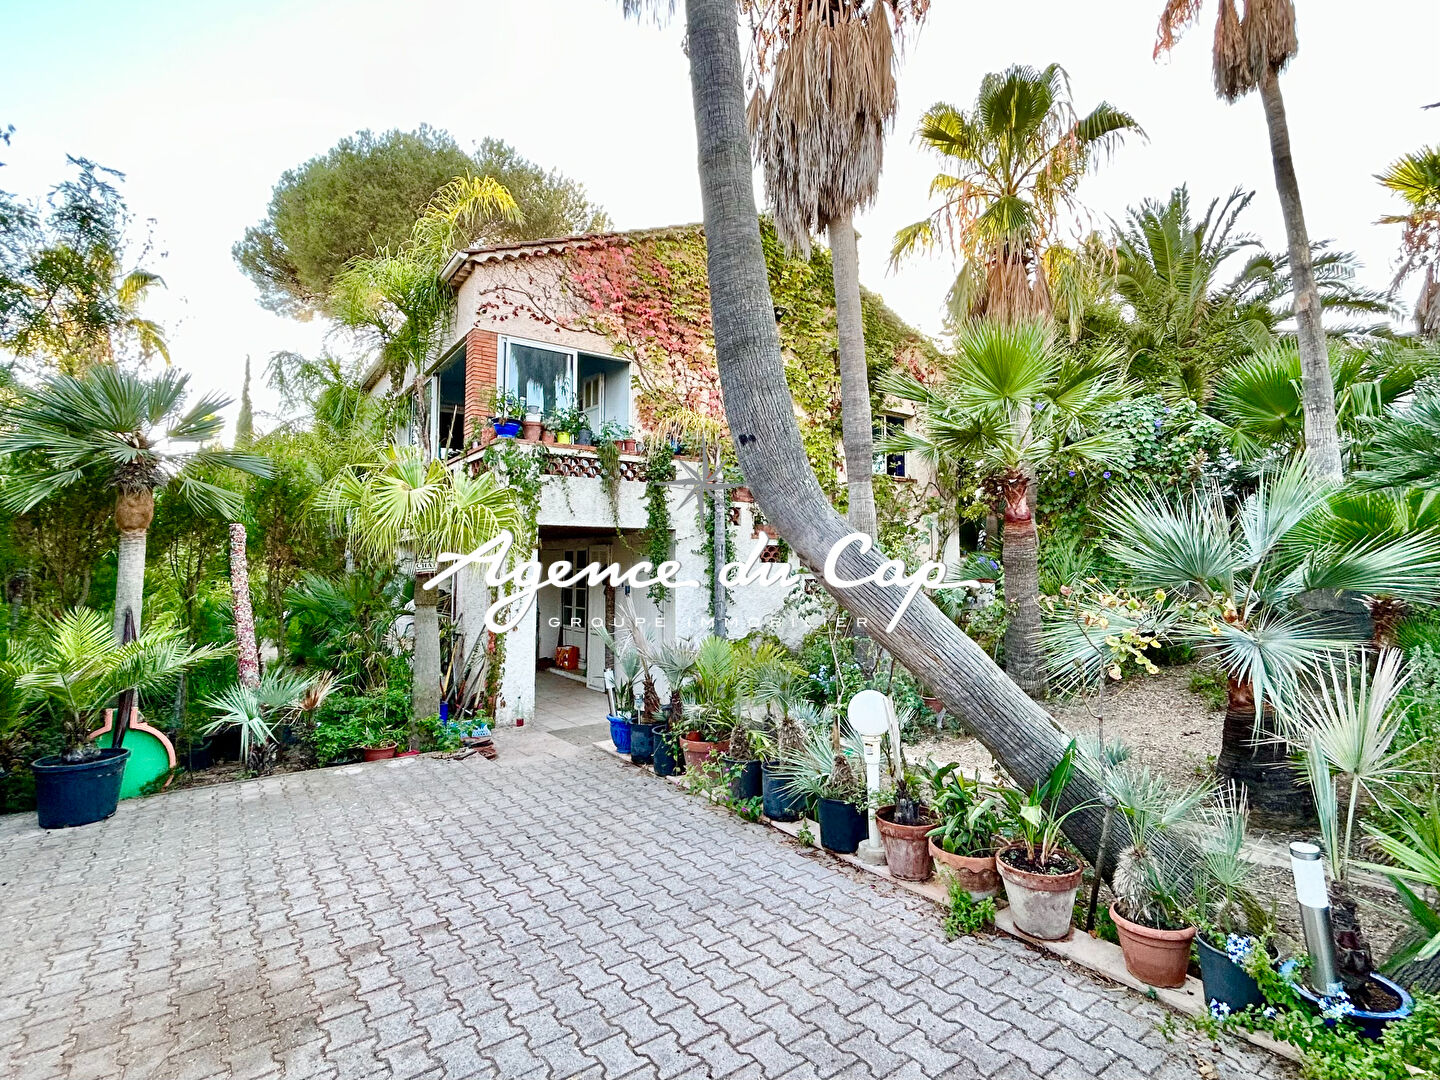 125sqm 4 ROOM VILLA WITH 3 BEDROOMS CLOSE TO THE BEACHES AND SHOPS OF SAINT AYGULF